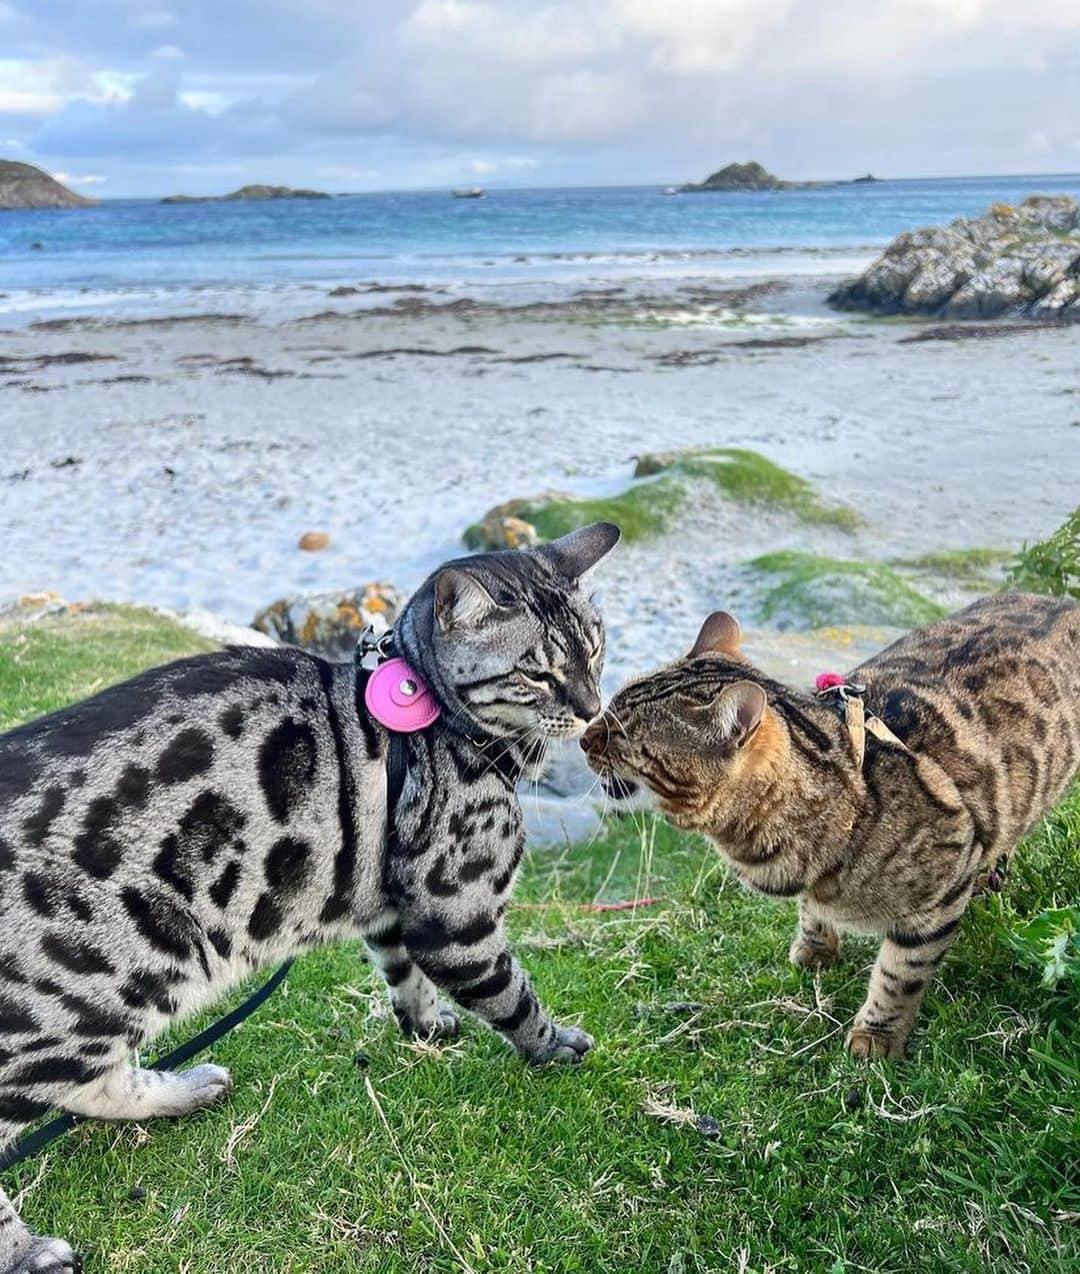 Bolt and Keelのインスタグラム：「Just let me give you a little kiss 😽 Tala & Mara have gone on some amazing adventures together 🐾🗺️  @adventrapets ➡️ @travel.with.tala  —————————————————— Follow @adventrapets to meet cute, brave and inspiring adventure pets from all over the world! 🌲🐶🐱🌲  • TAG US IN YOUR POSTS to get your little adventurer featured! #adventrapets ——————————————————」